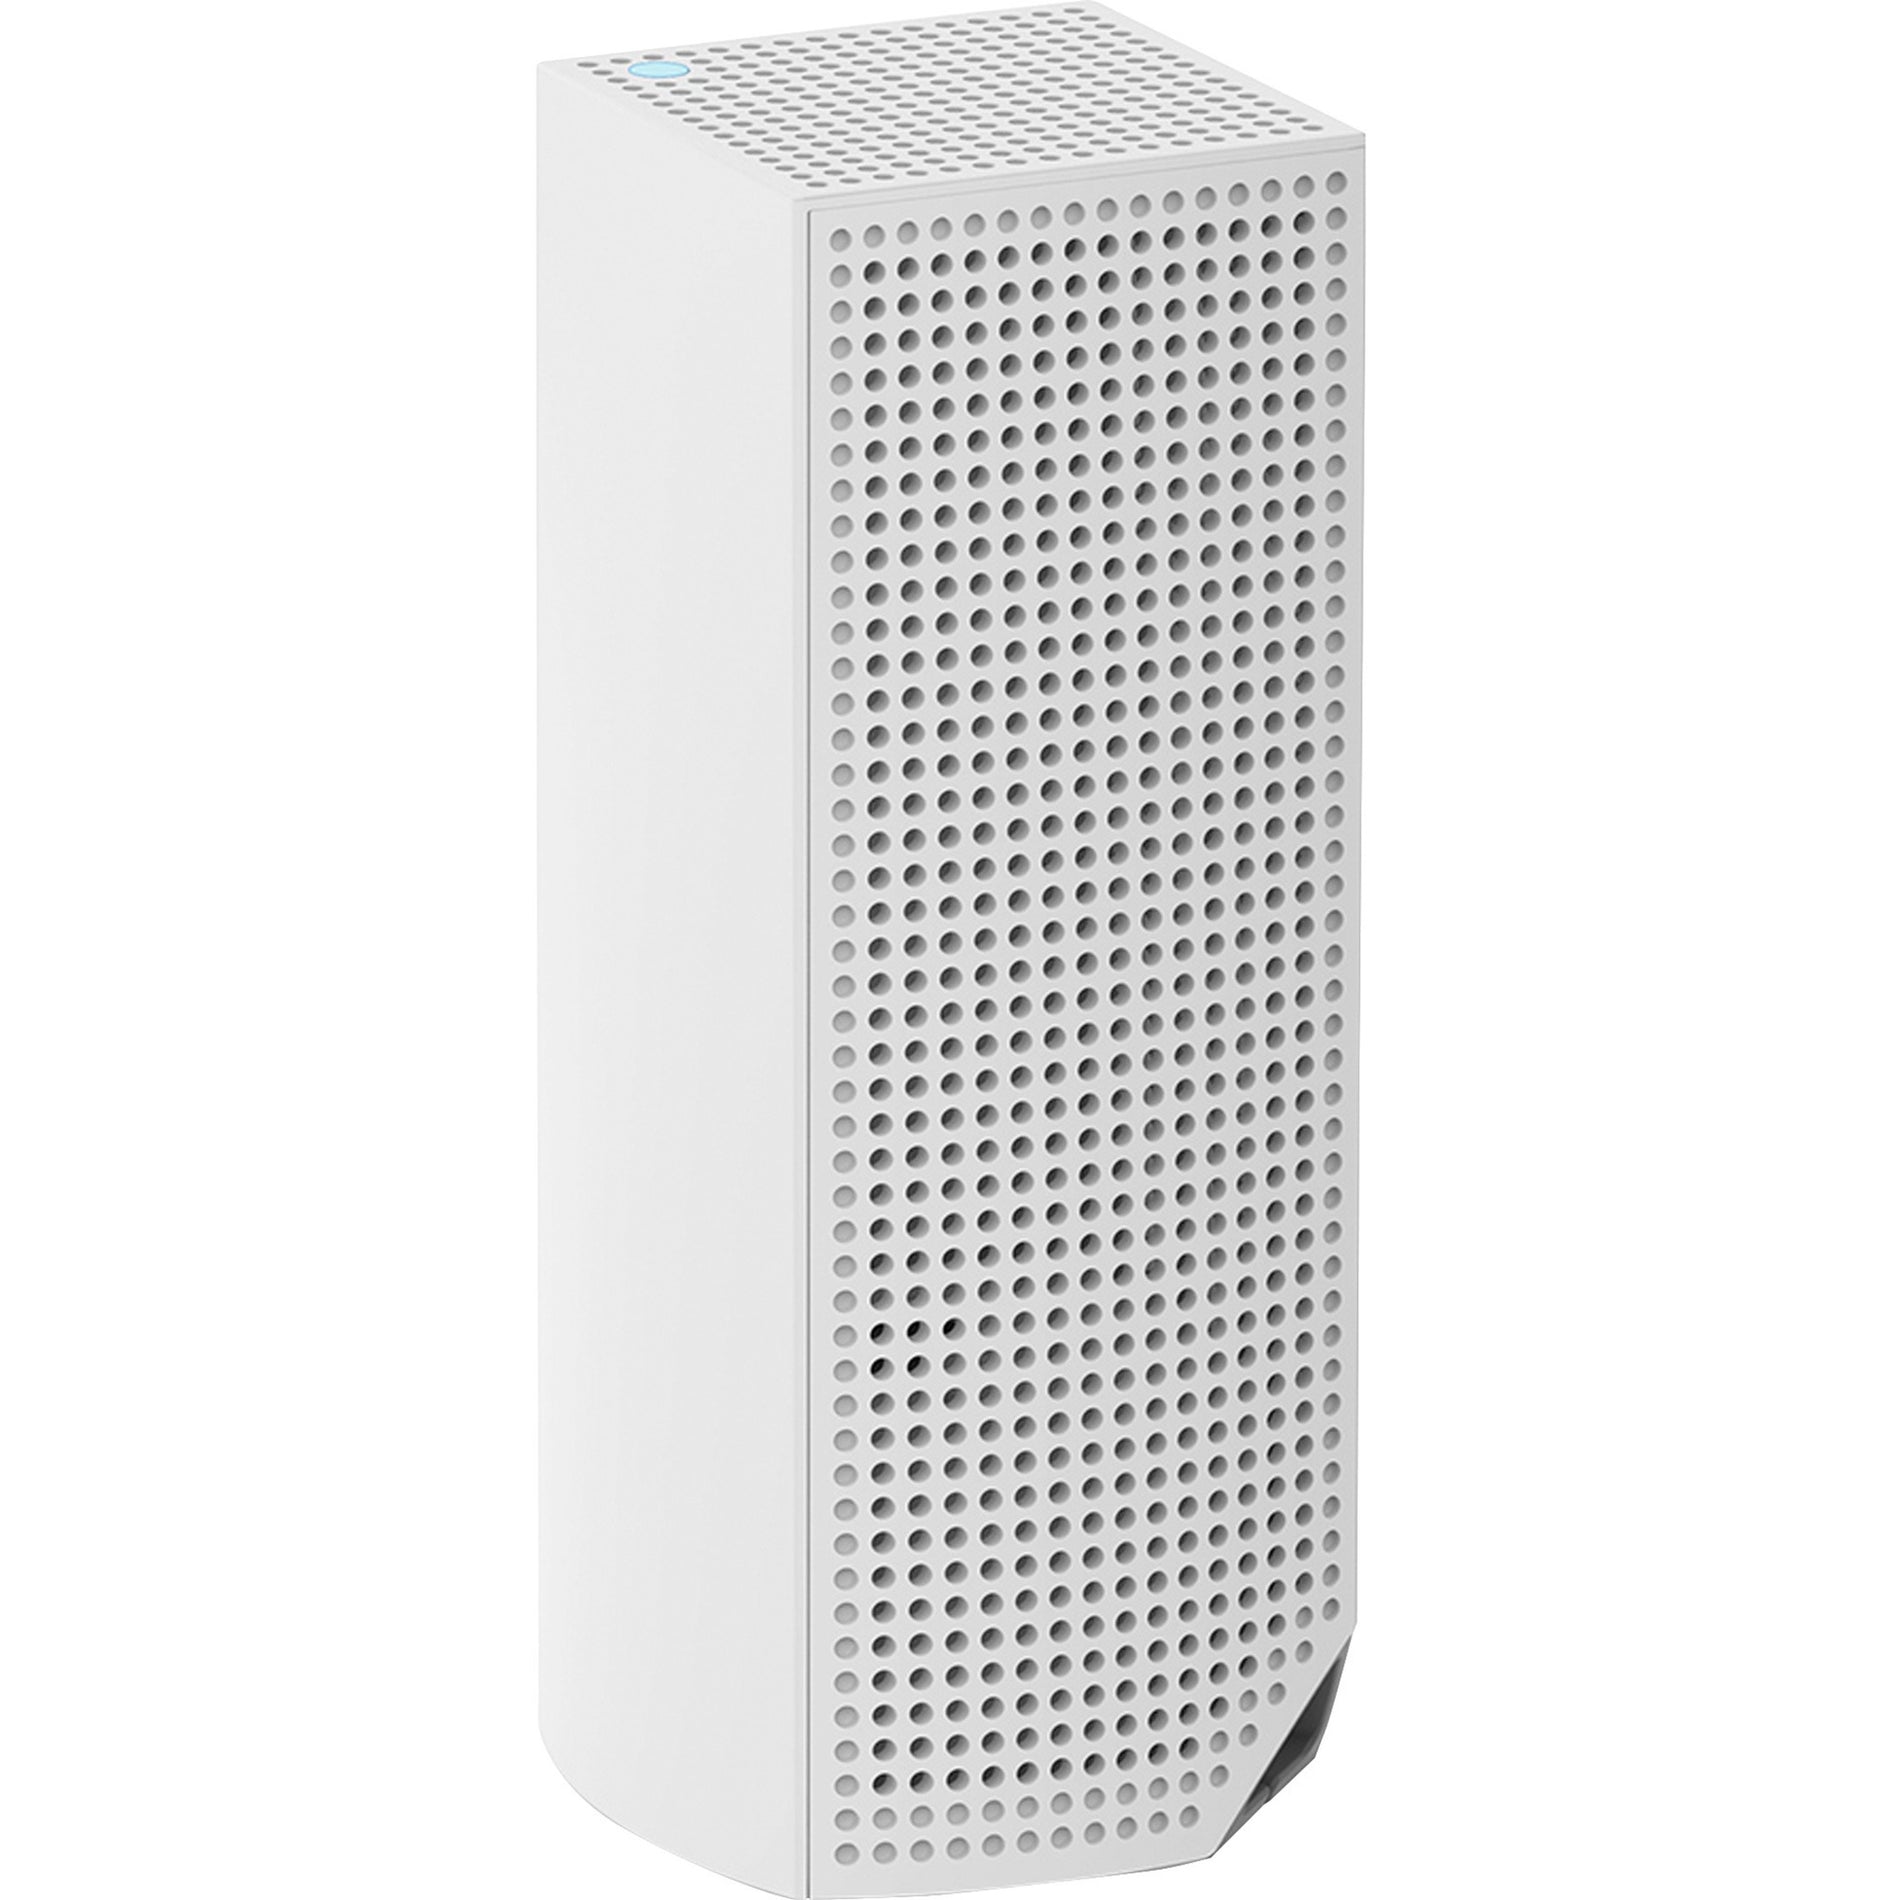 Linksys WHW0302 Velop Wi-Fi 5 Router, Intelligent Mesh Tri-Band Wi-Fi System, Gigabit Ethernet, 275 MB/s